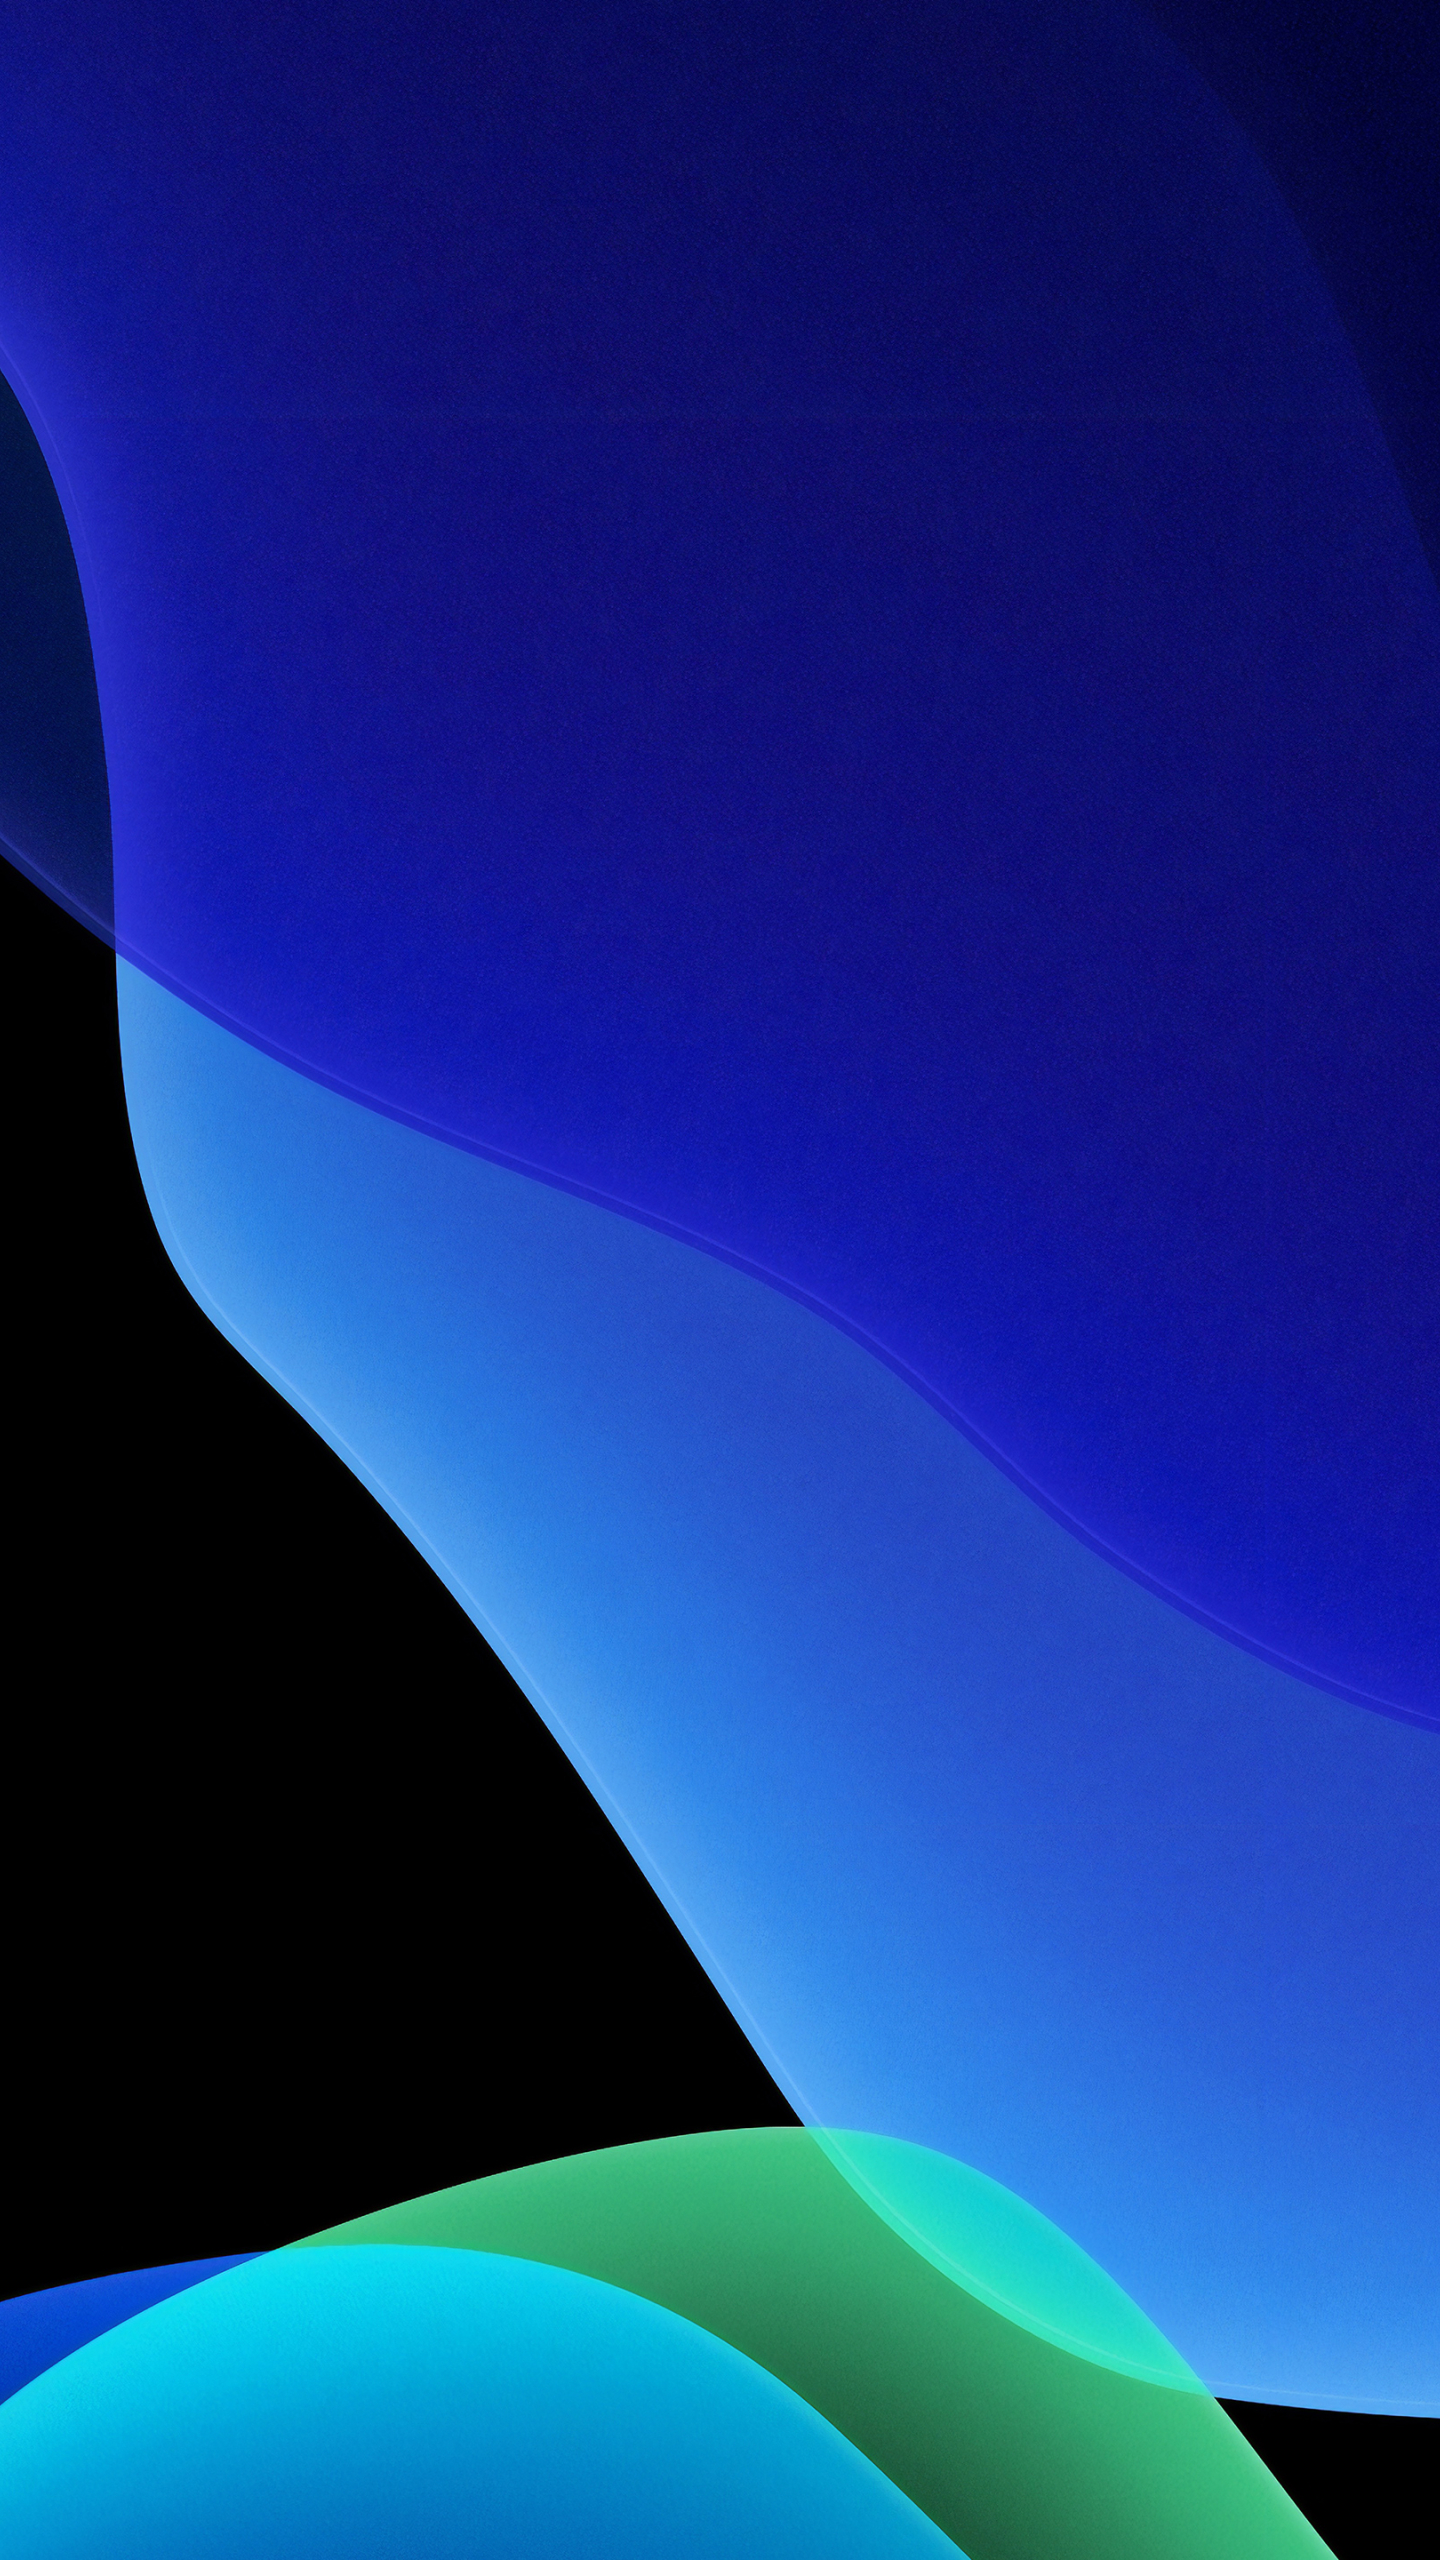 1440x2560 Dark Blue Ios 13 Apple Samsung Galaxy S6 S7 Google Pixel Xl Nexus 6 6p Lg G5 Wallpaper Hd Abstract 4k Wallpapers Images Photos And Background